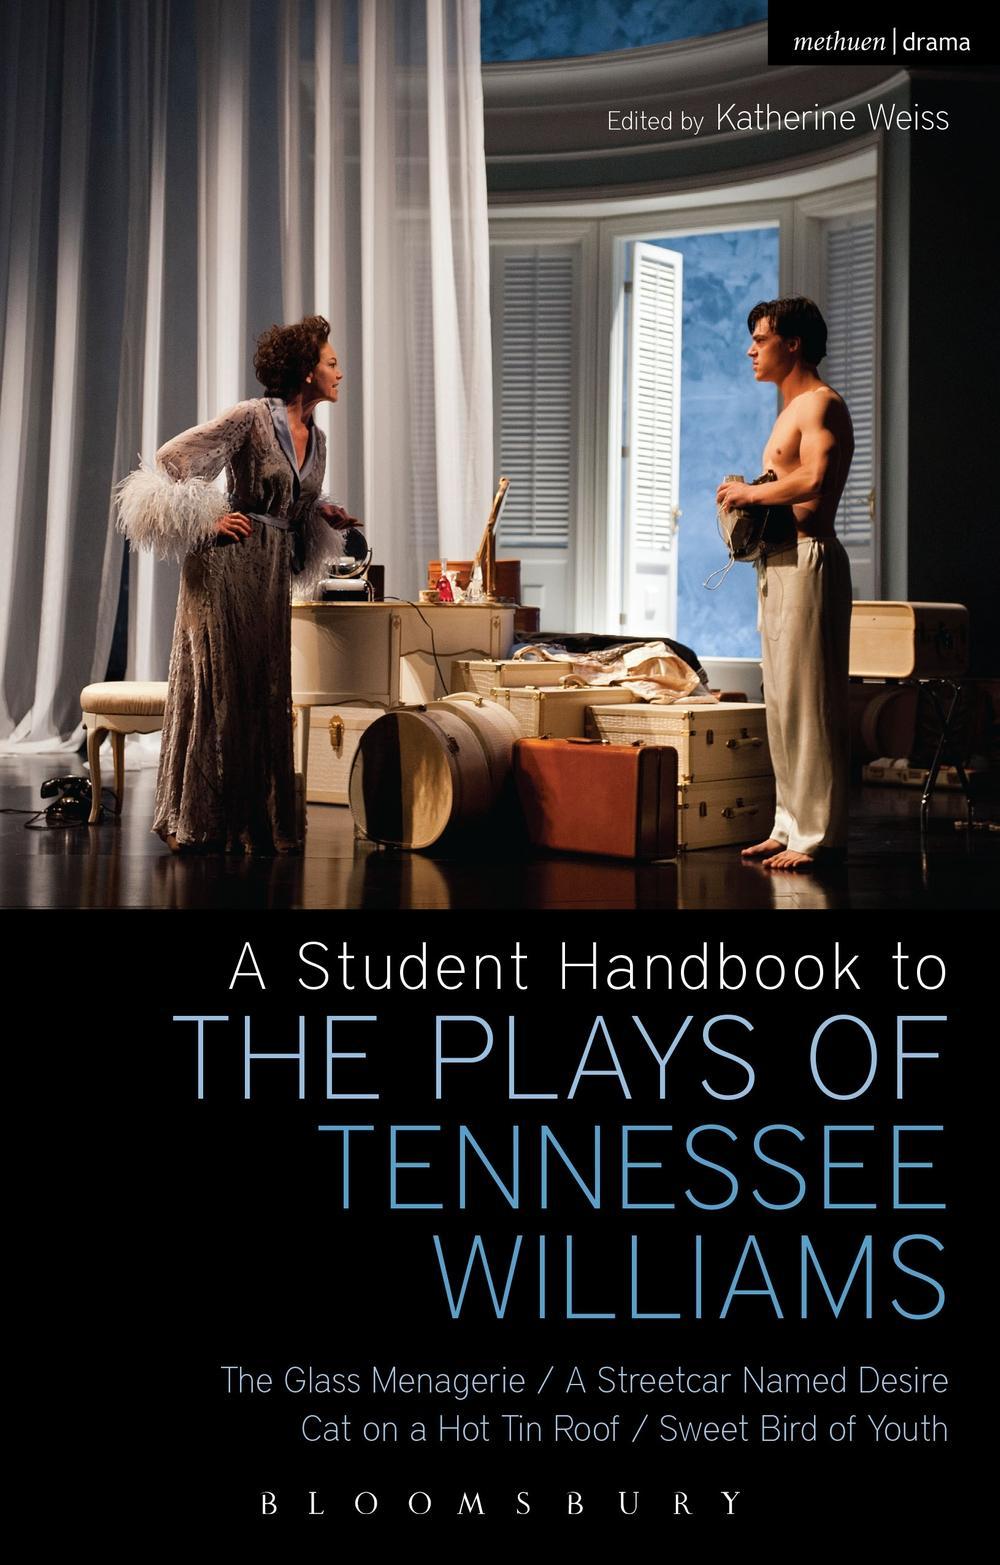 Student Handbook to the Plays of Tennessee Williams - Stephen Bottoms